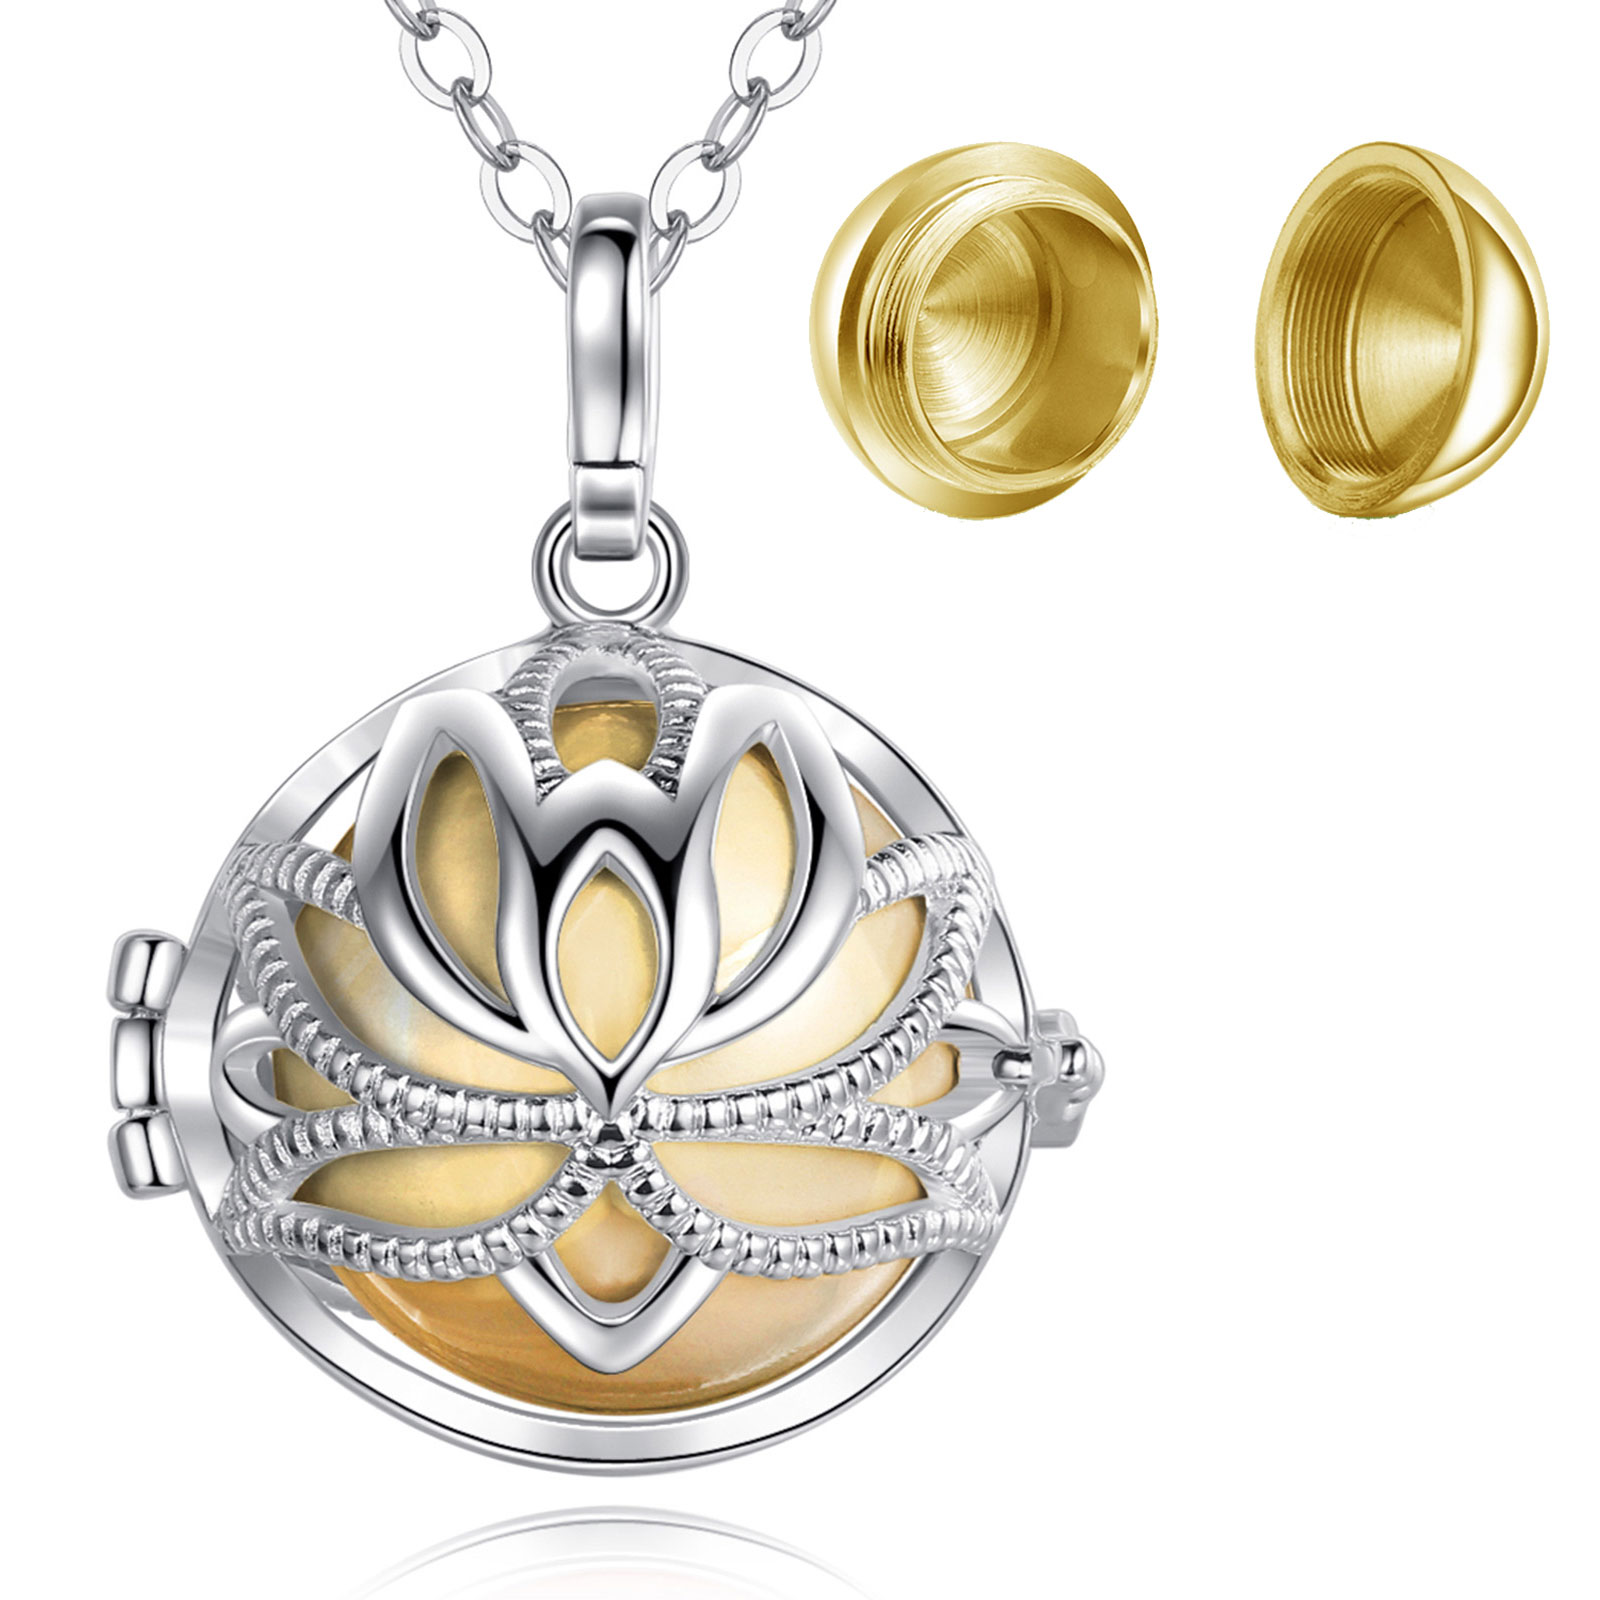 Merryshine Hot Sell Lotus Cremation Pendant 925 Sterling Silver Urn Necklace Jewelry